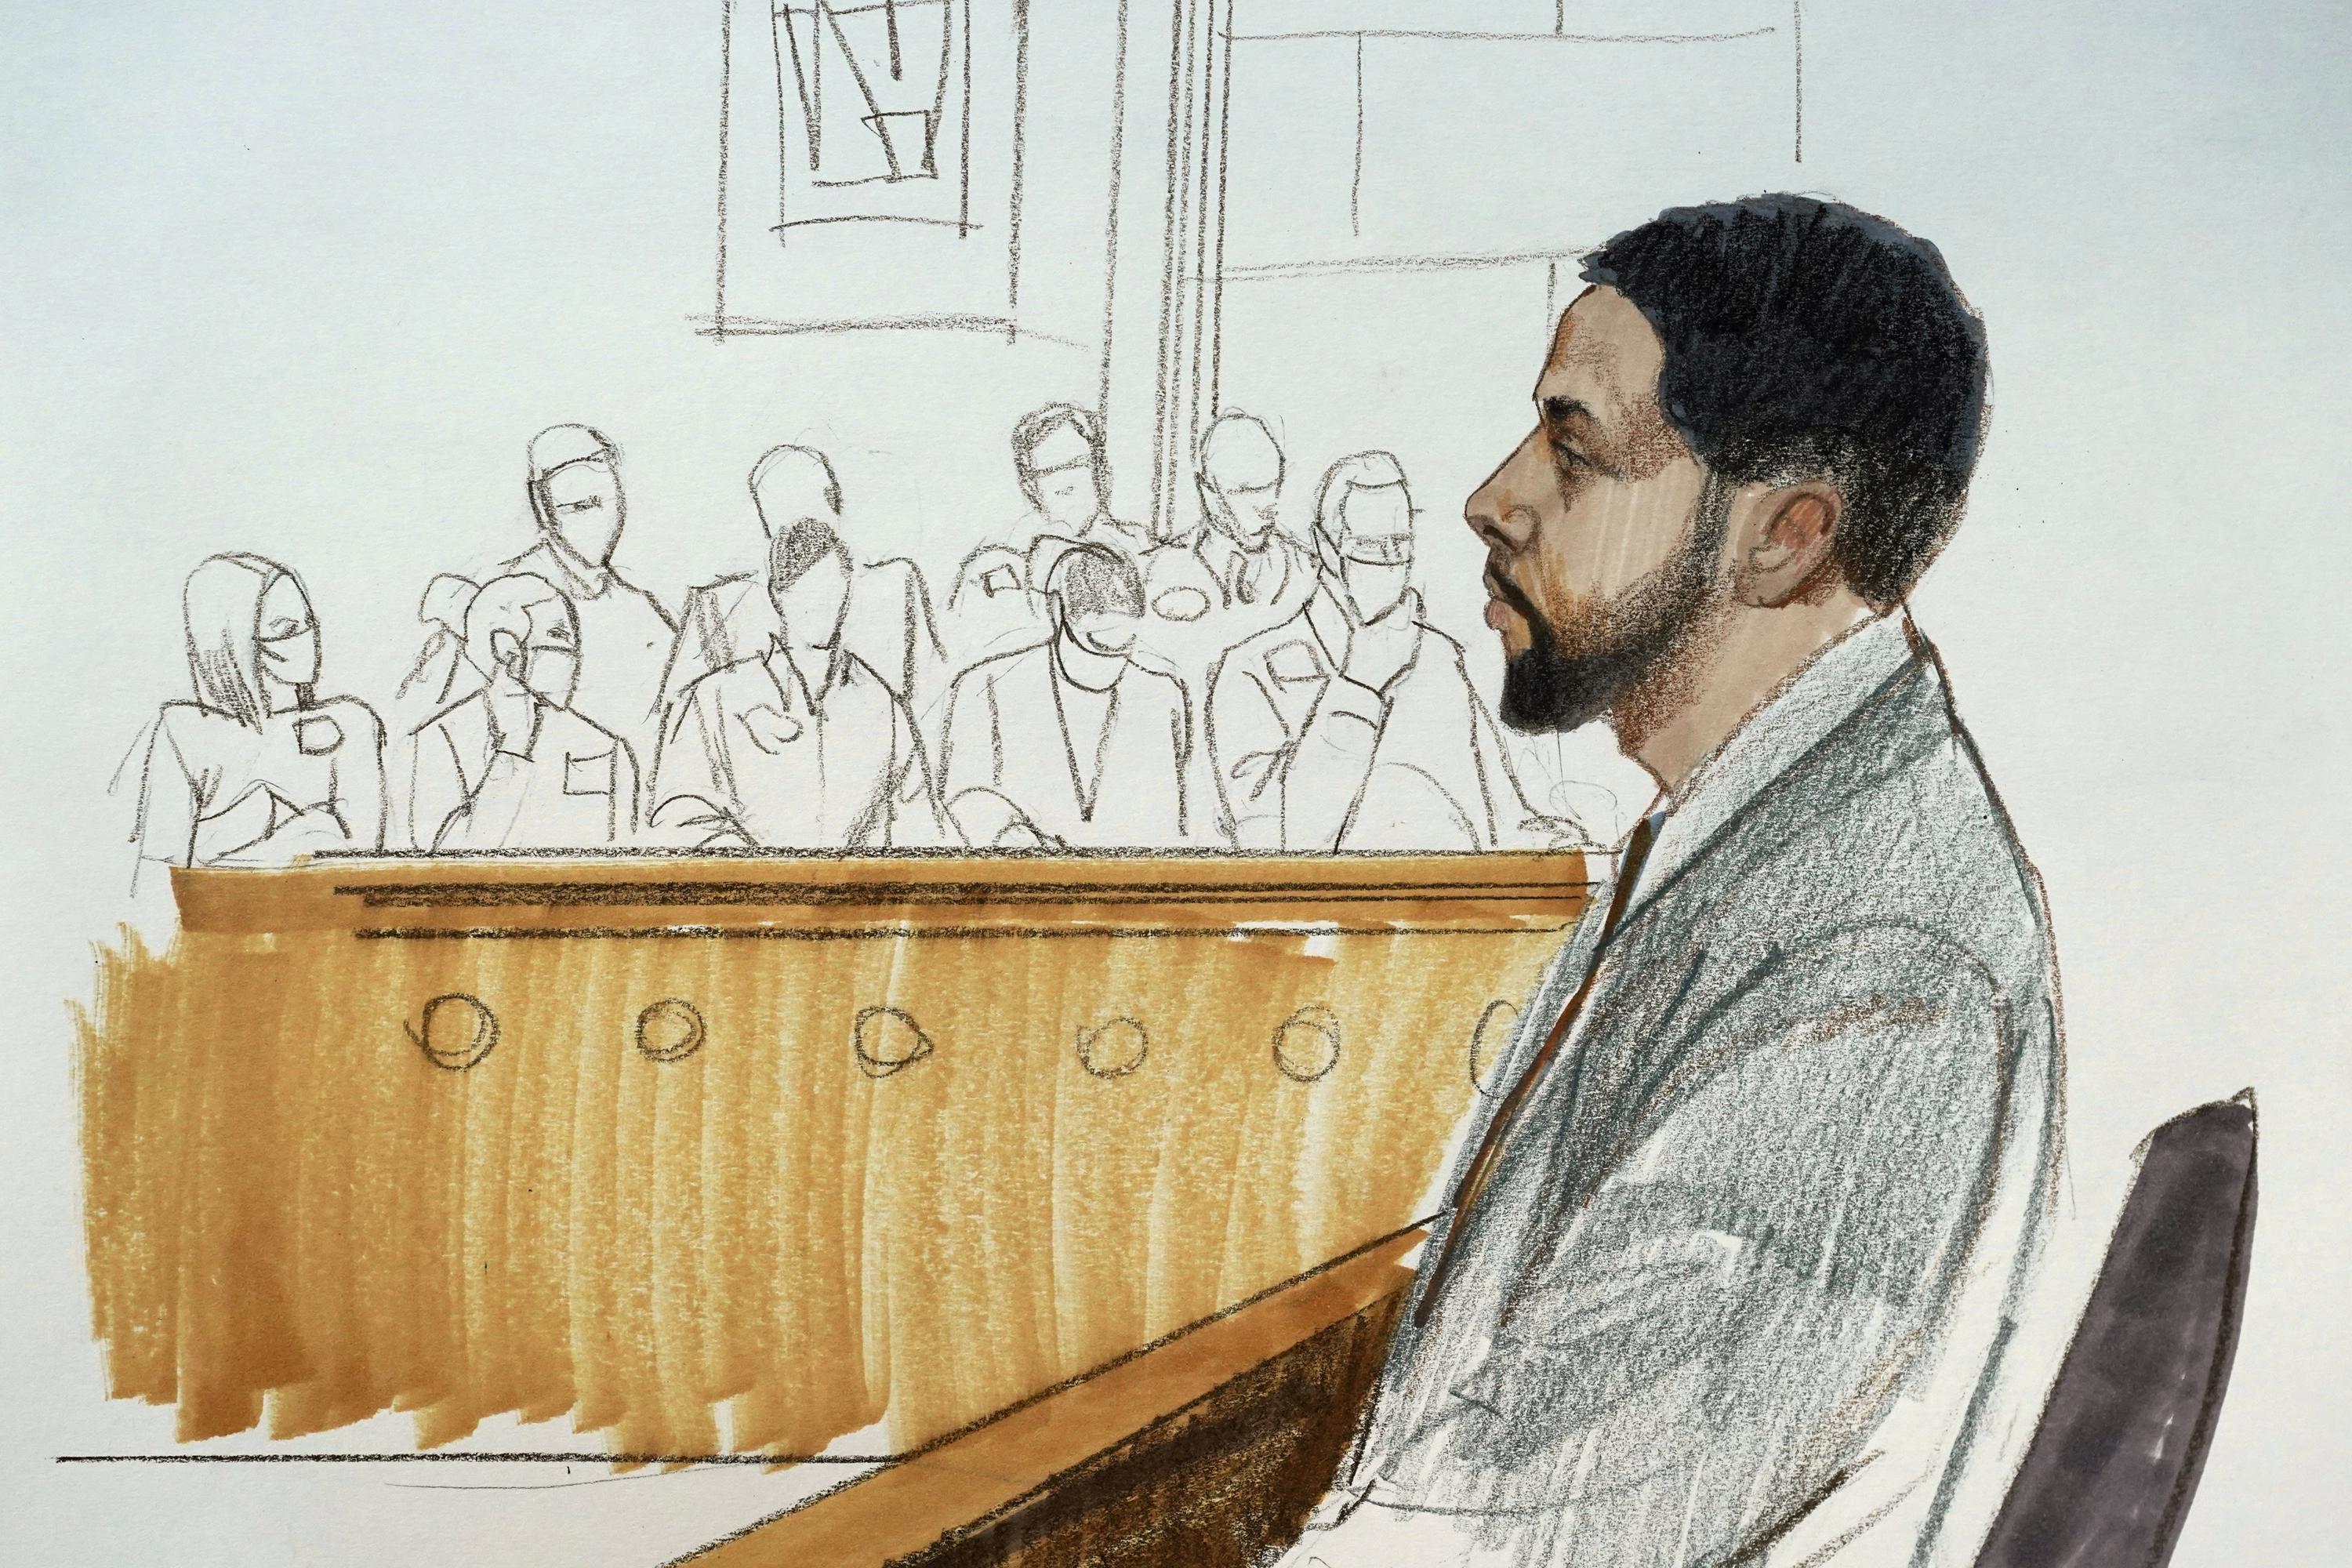 Jussie Smollett testifies at his trial: ‘There was no hoax’ – Associated Press